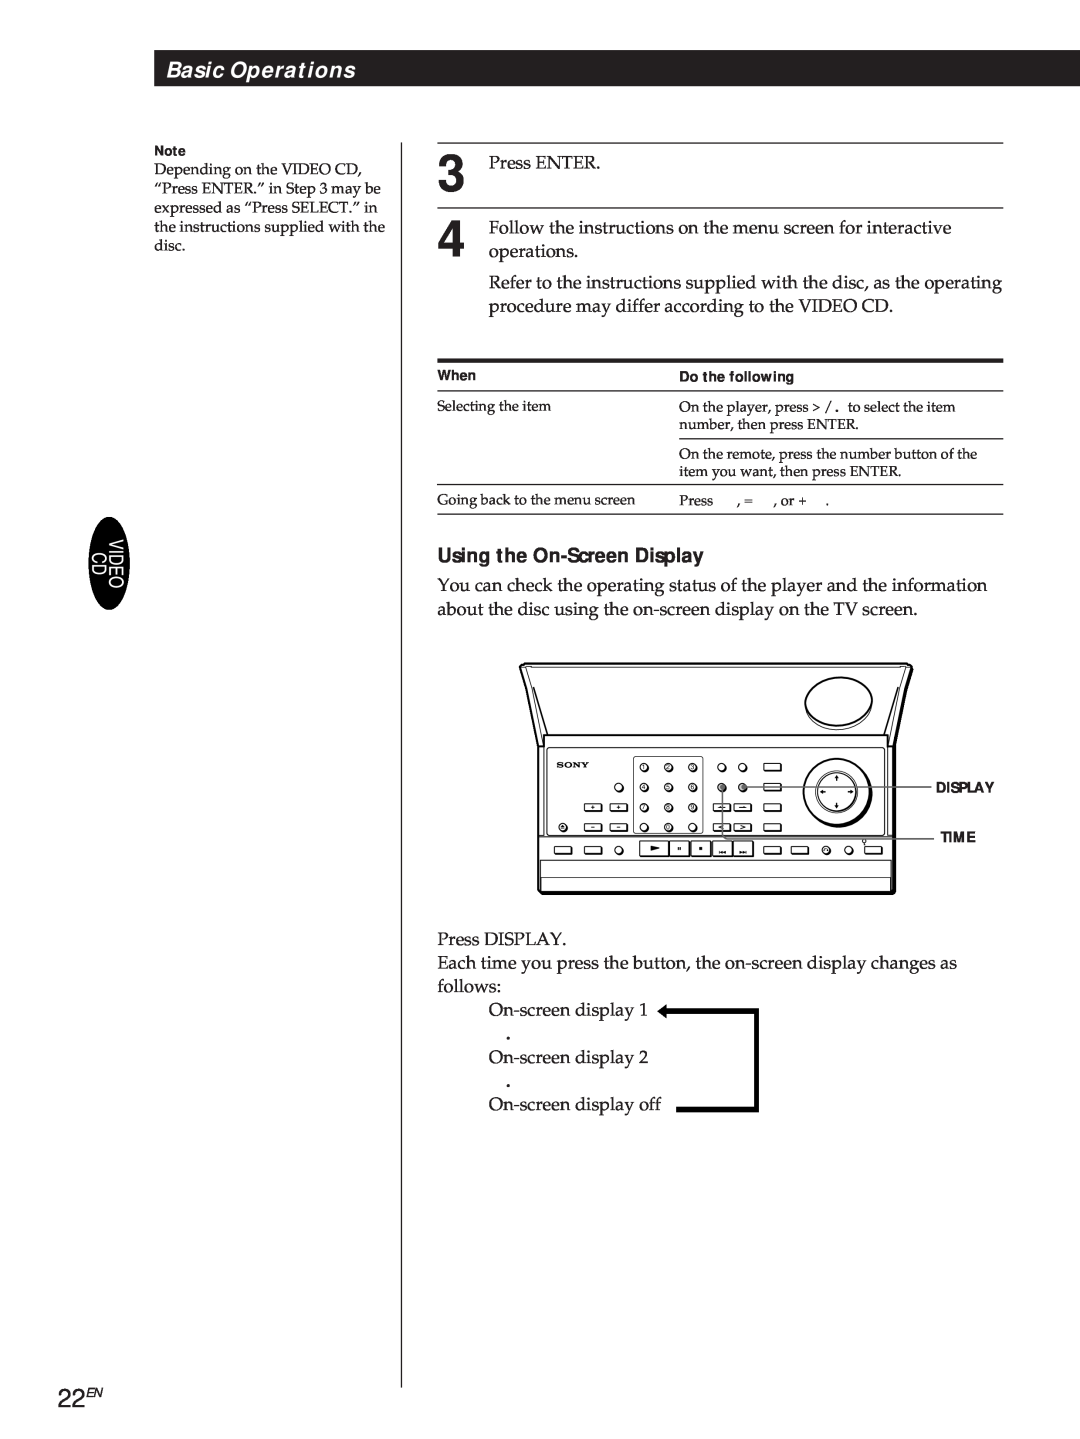 Sony DVP3980 manual 22EN, Basic Operations, Using the On-Screen Display, When, Do the following 